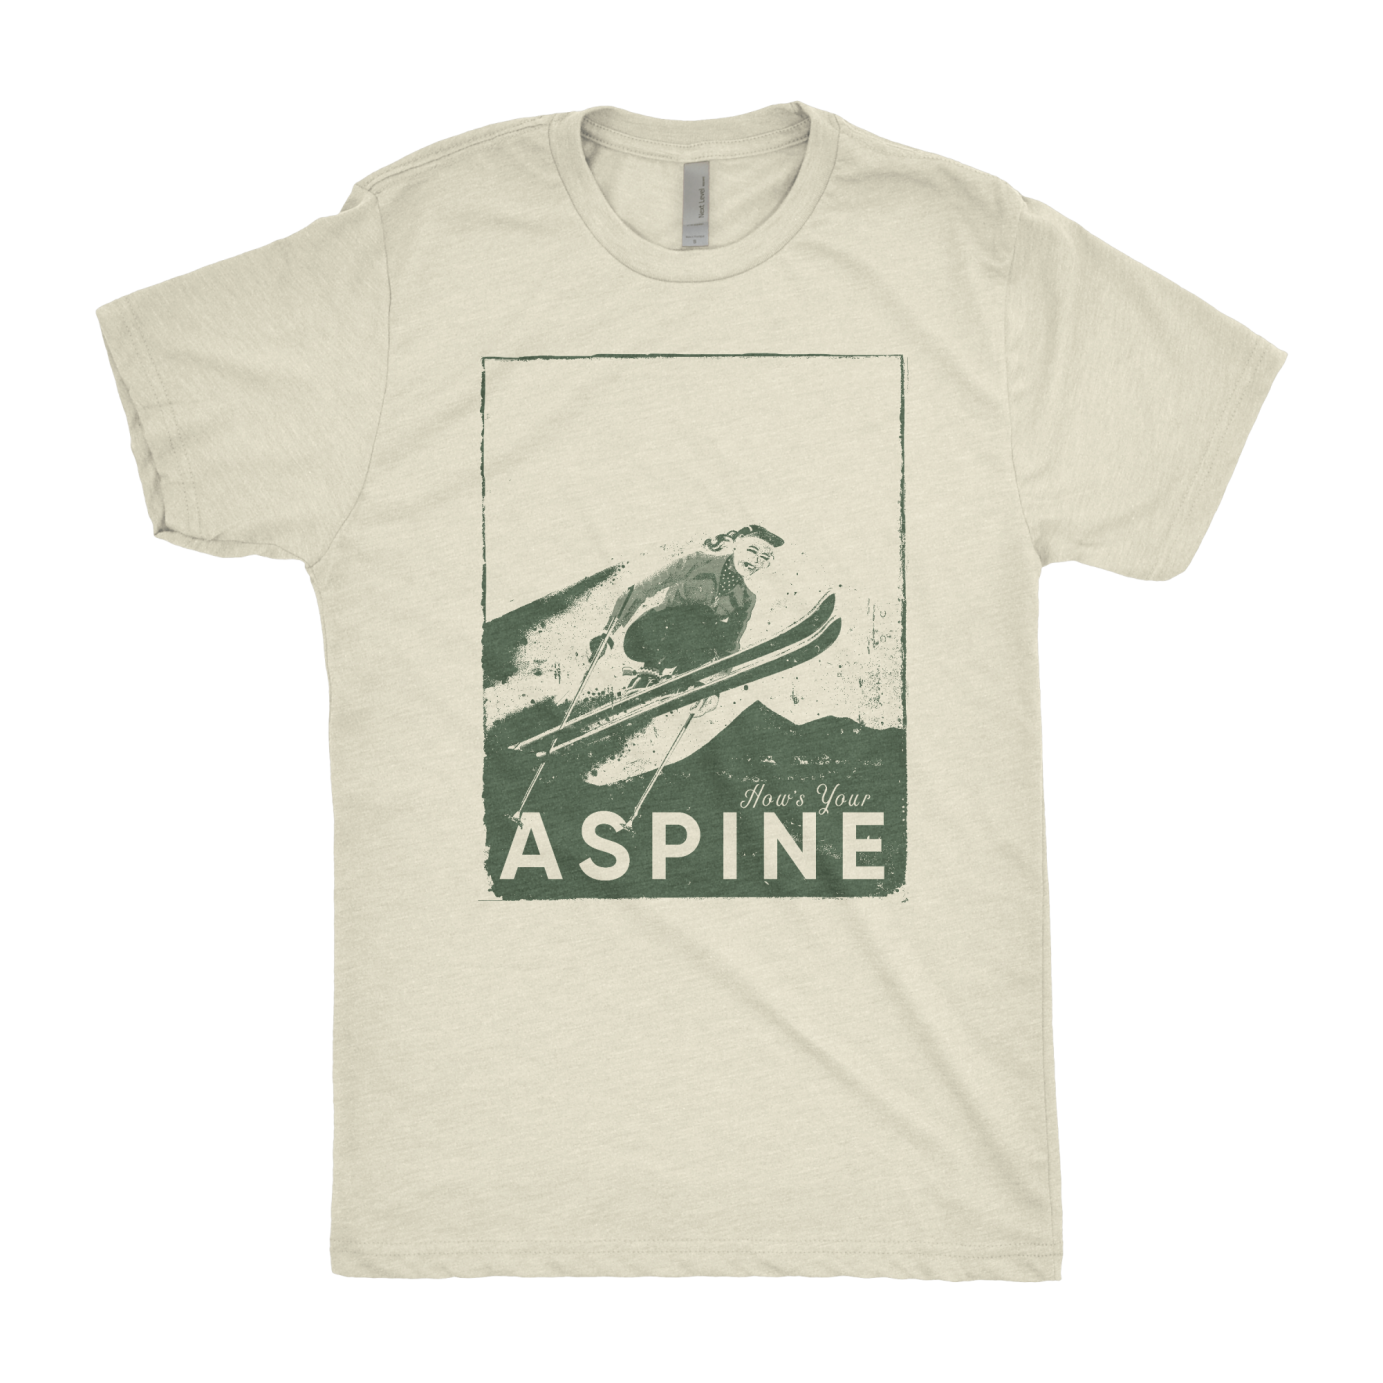 Graphic design for Aspine by dxvidesigns